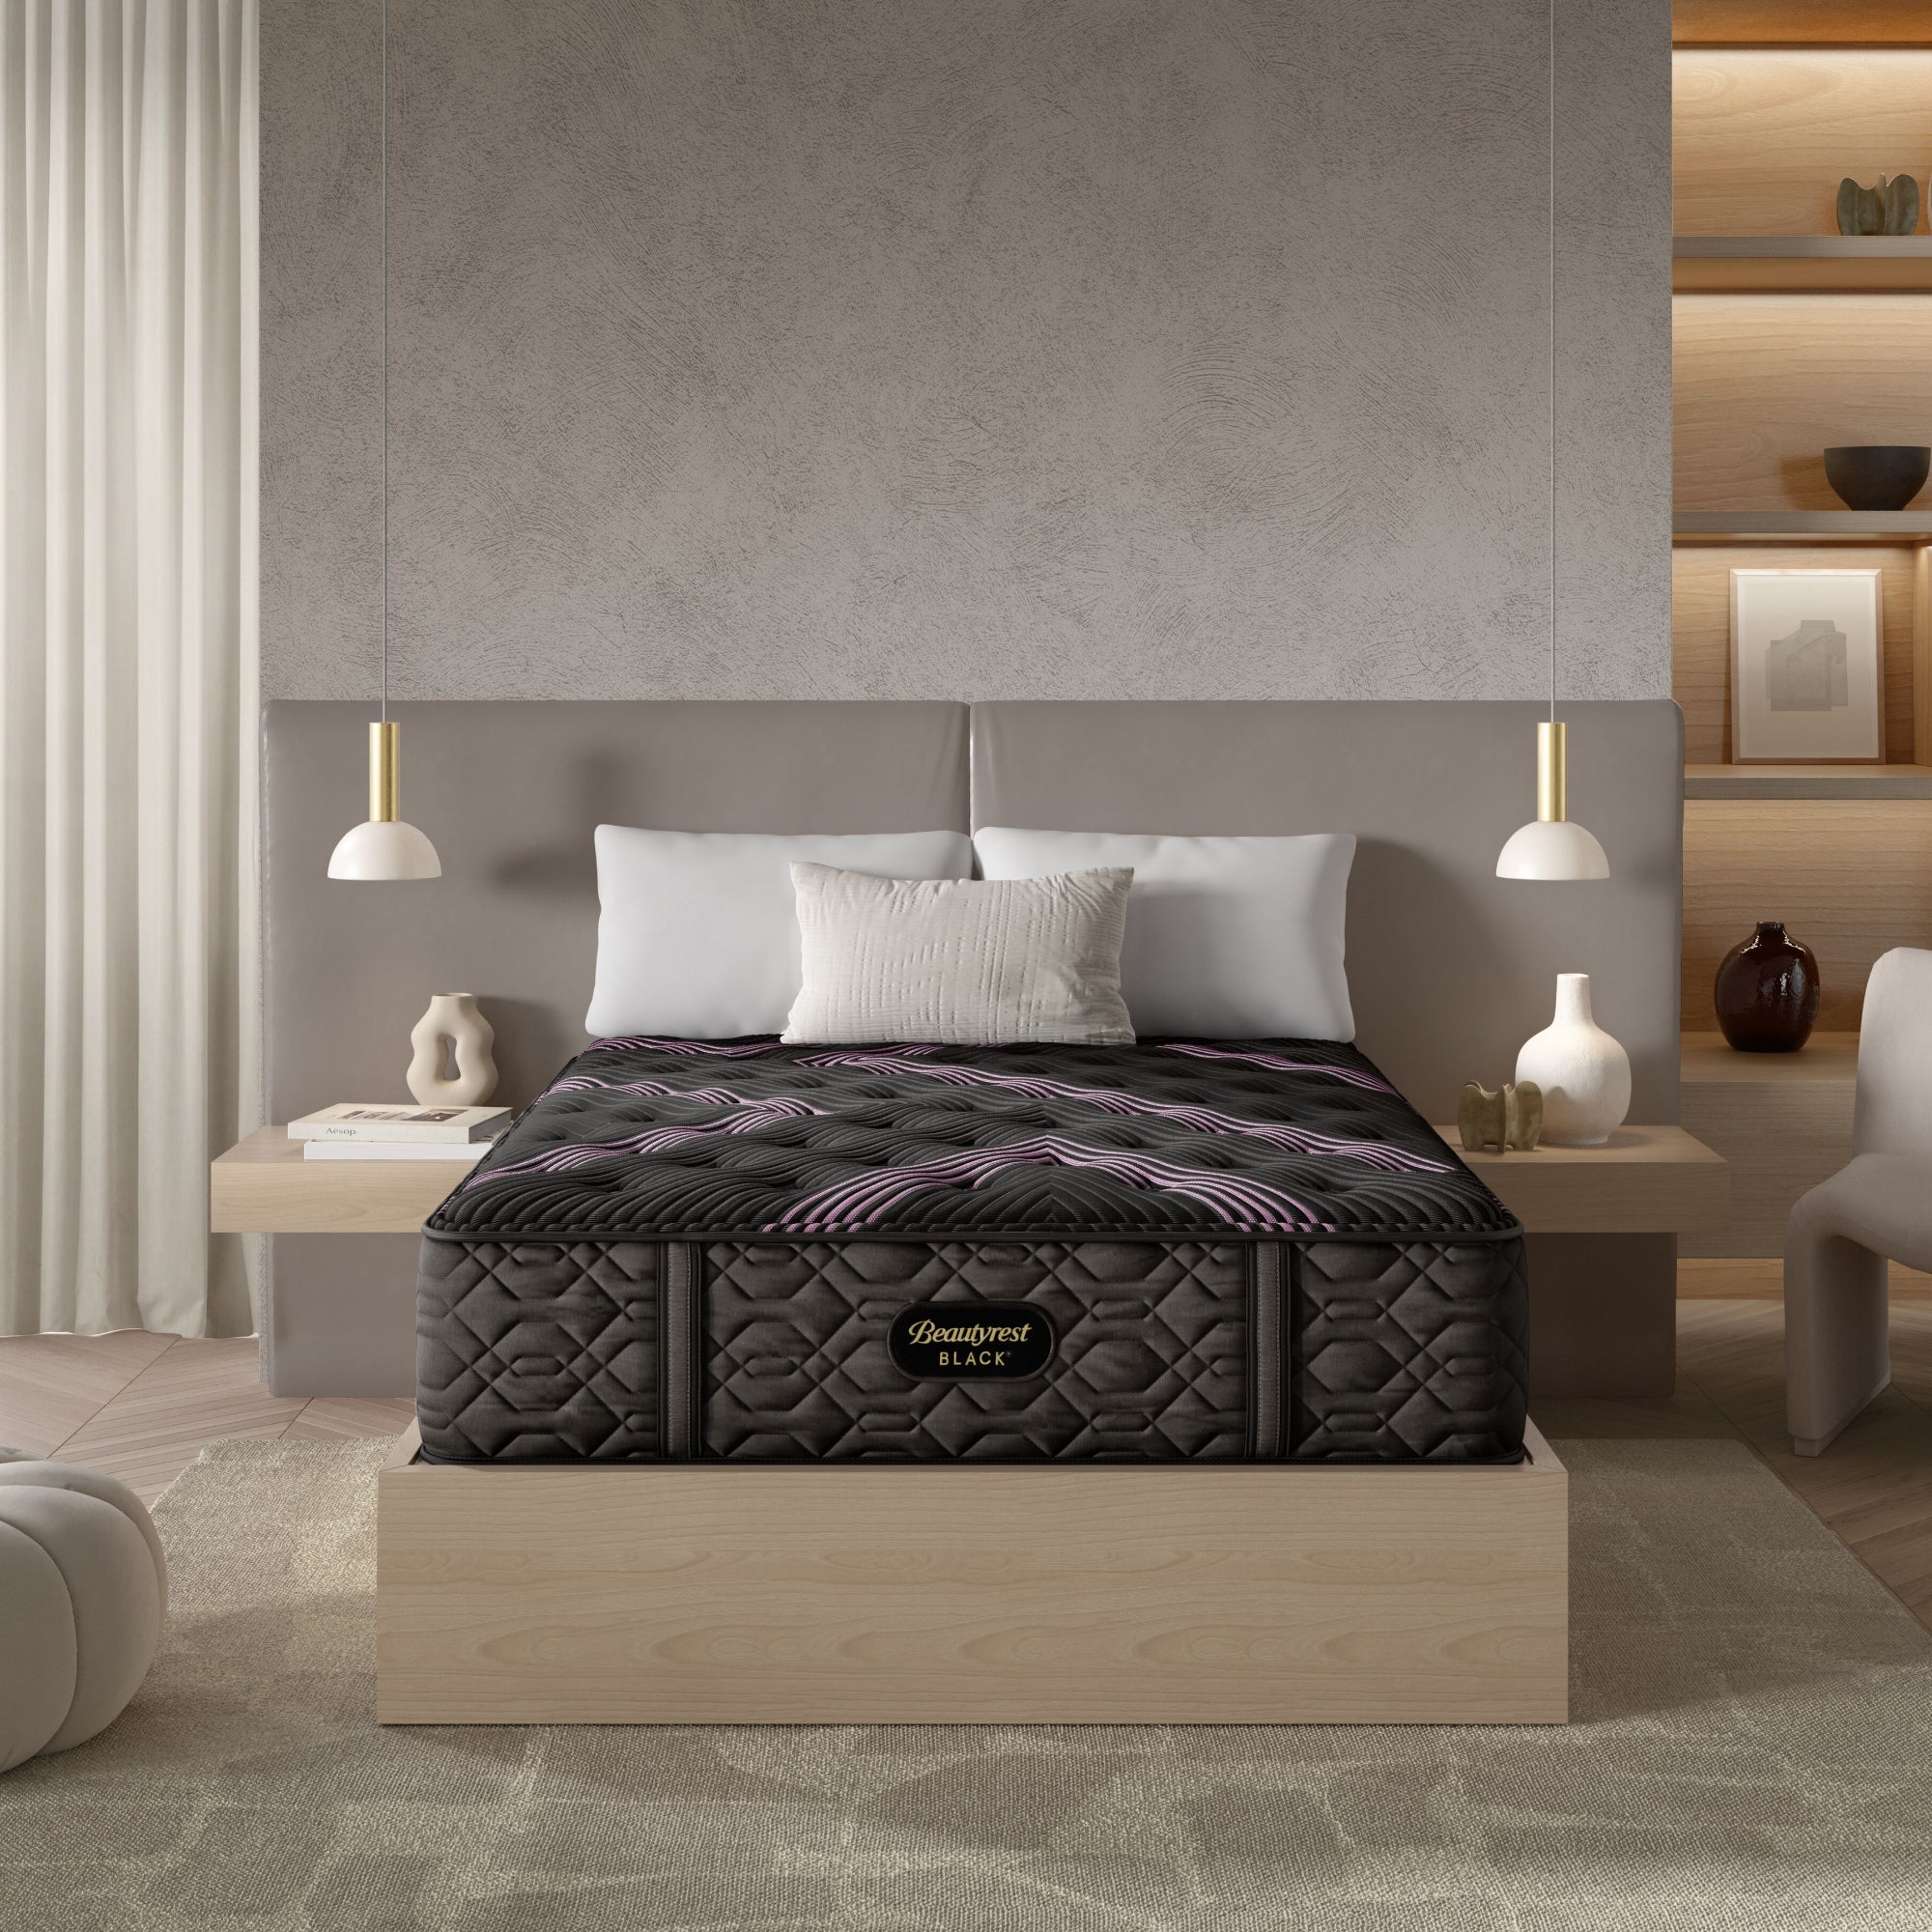 The Beautyrest Black firm mattress in a bedroom on a light brown wood bed frame || series: Series Two || feel: firm